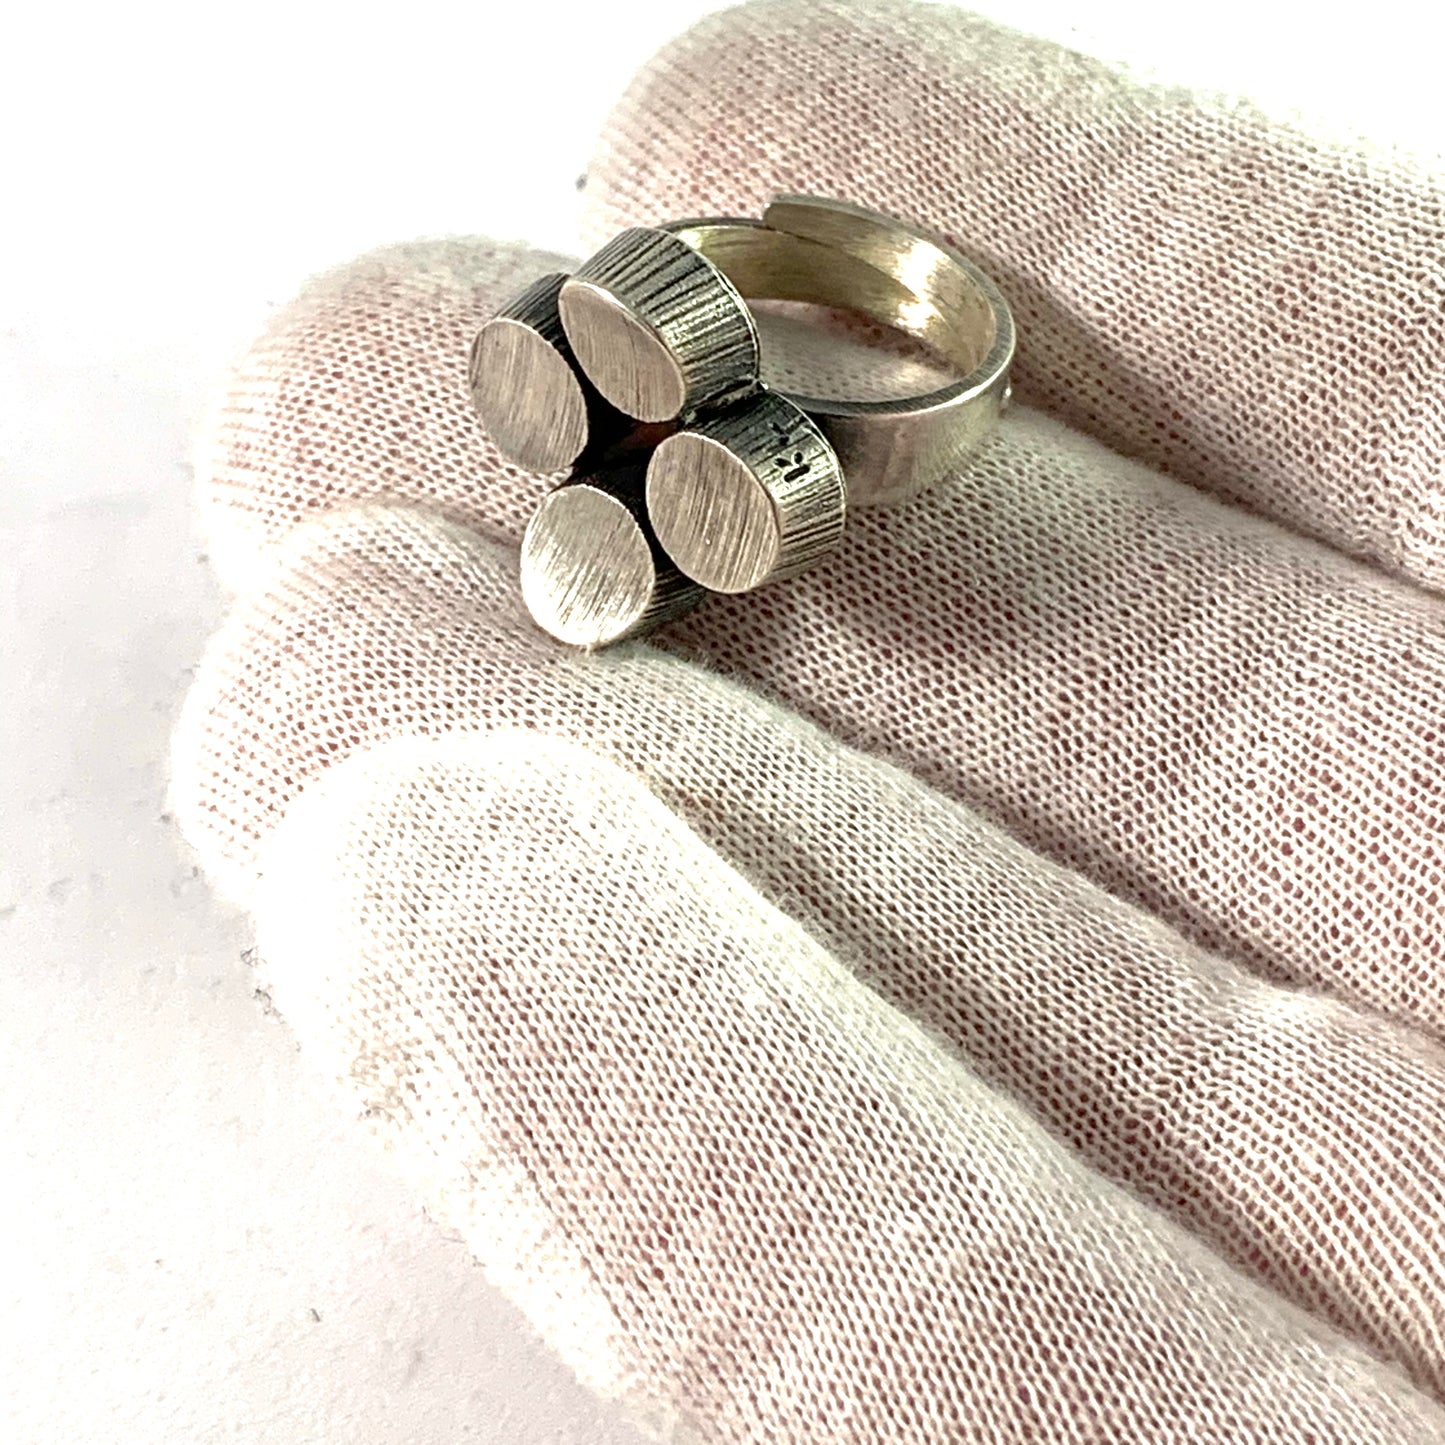 Karl Laine for Sten & Laine, Finland year 1973 Sterling Ring.